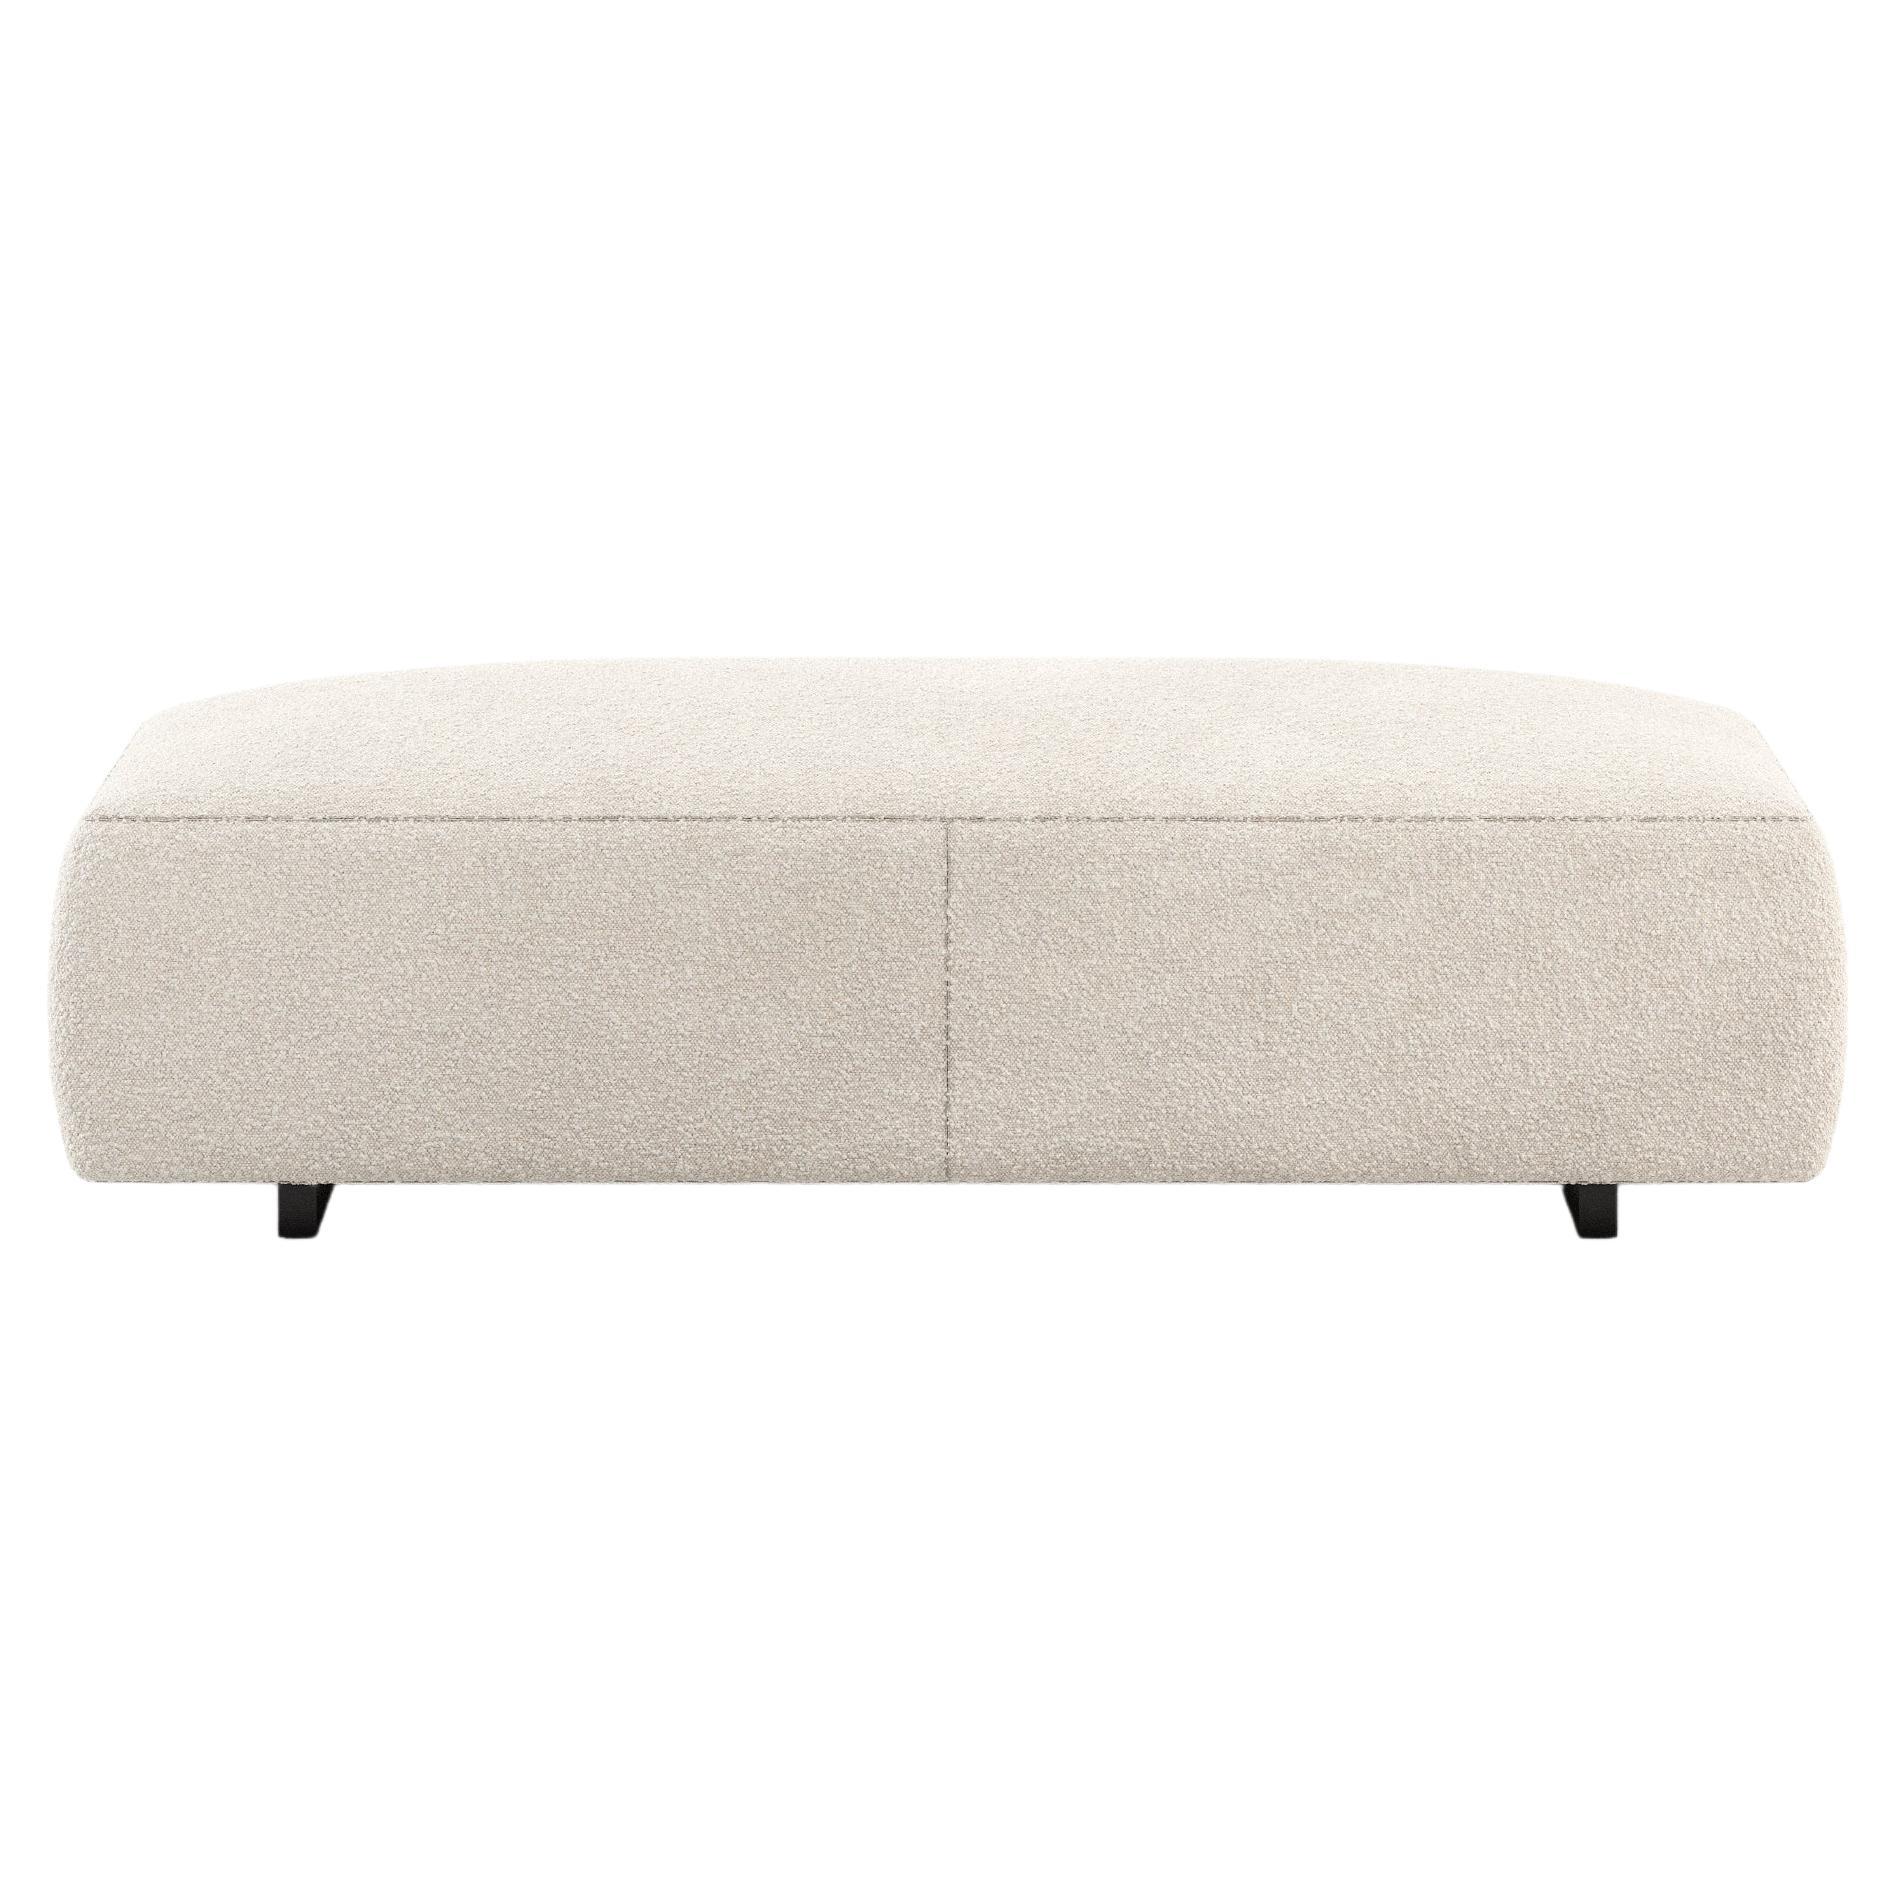 Upholstered bench with custom solutions by Laskasas For Sale